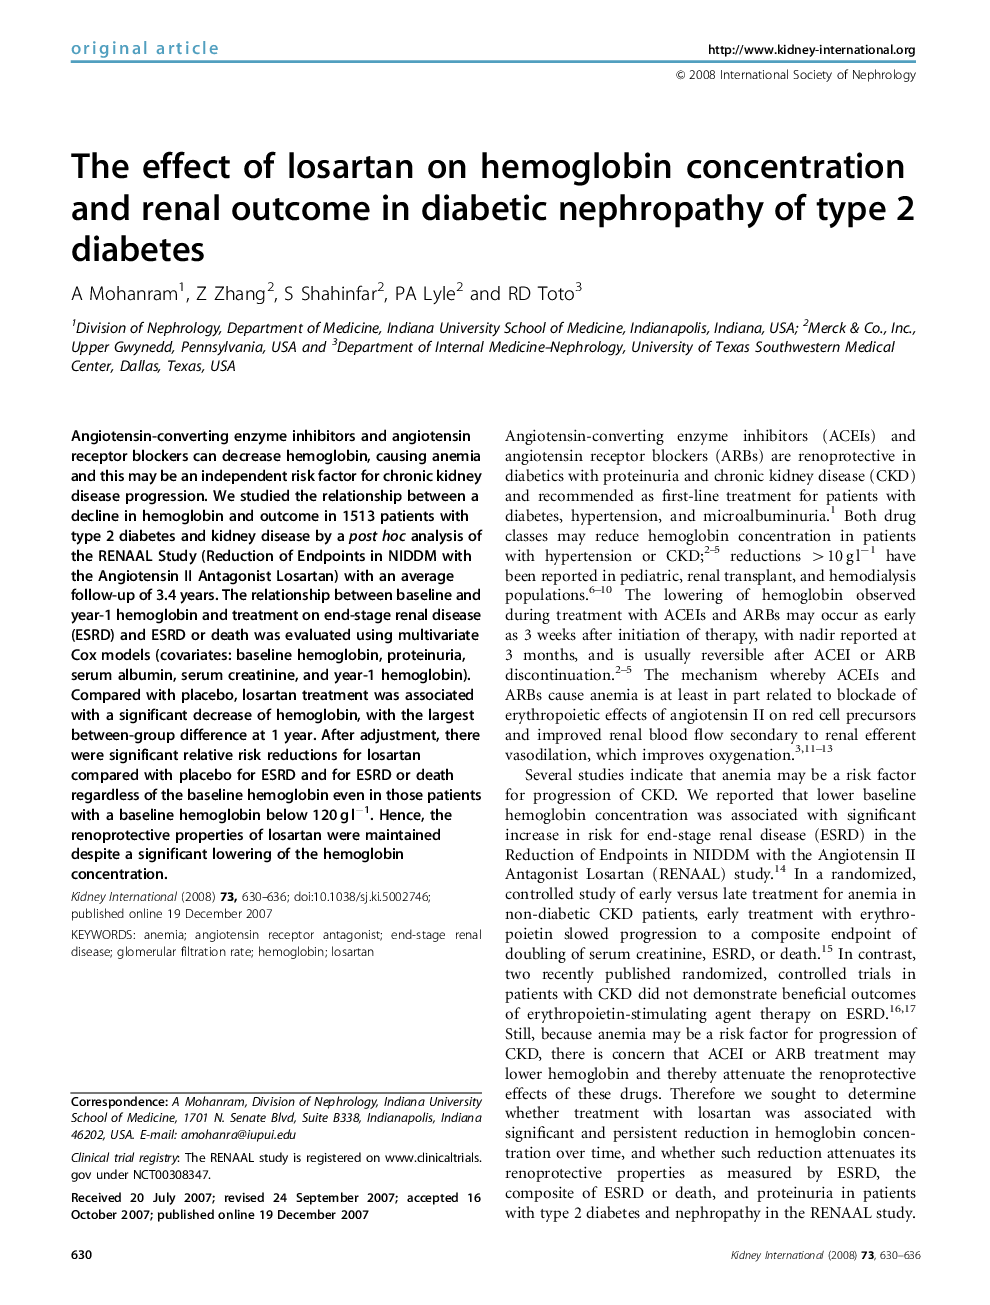 The effect of losartan on hemoglobin concentration and renal outcome in diabetic nephropathy of type 2 diabetes 